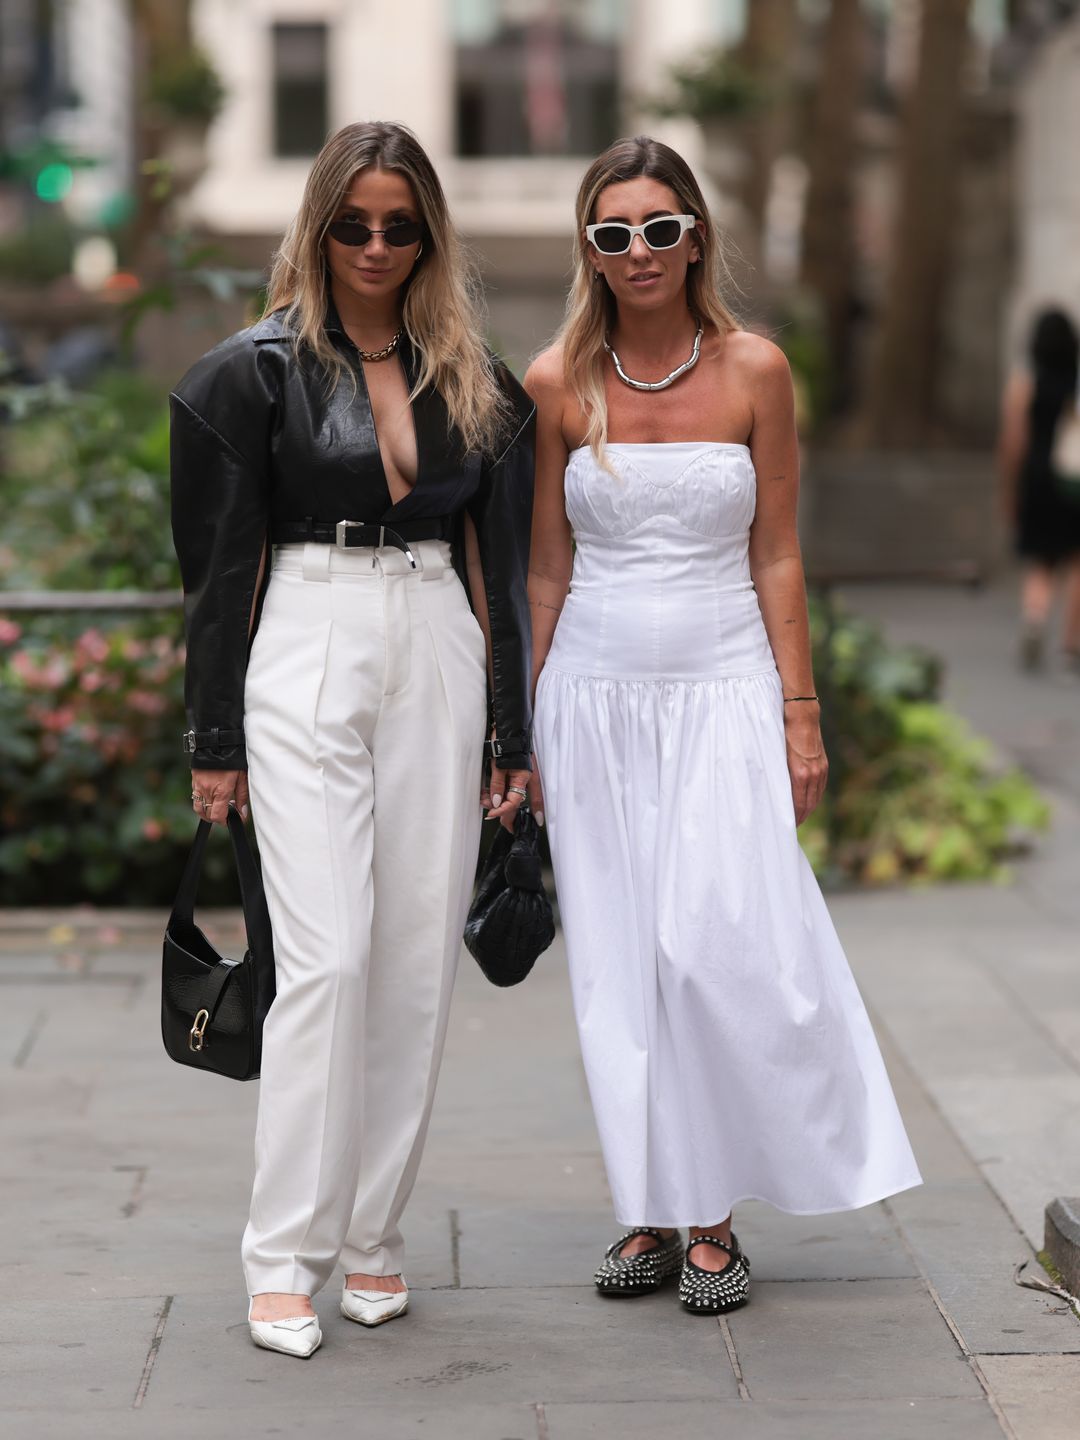 Hannah Lewis was spotted at New York Fashion Week in an all-white drop-waist ensemble